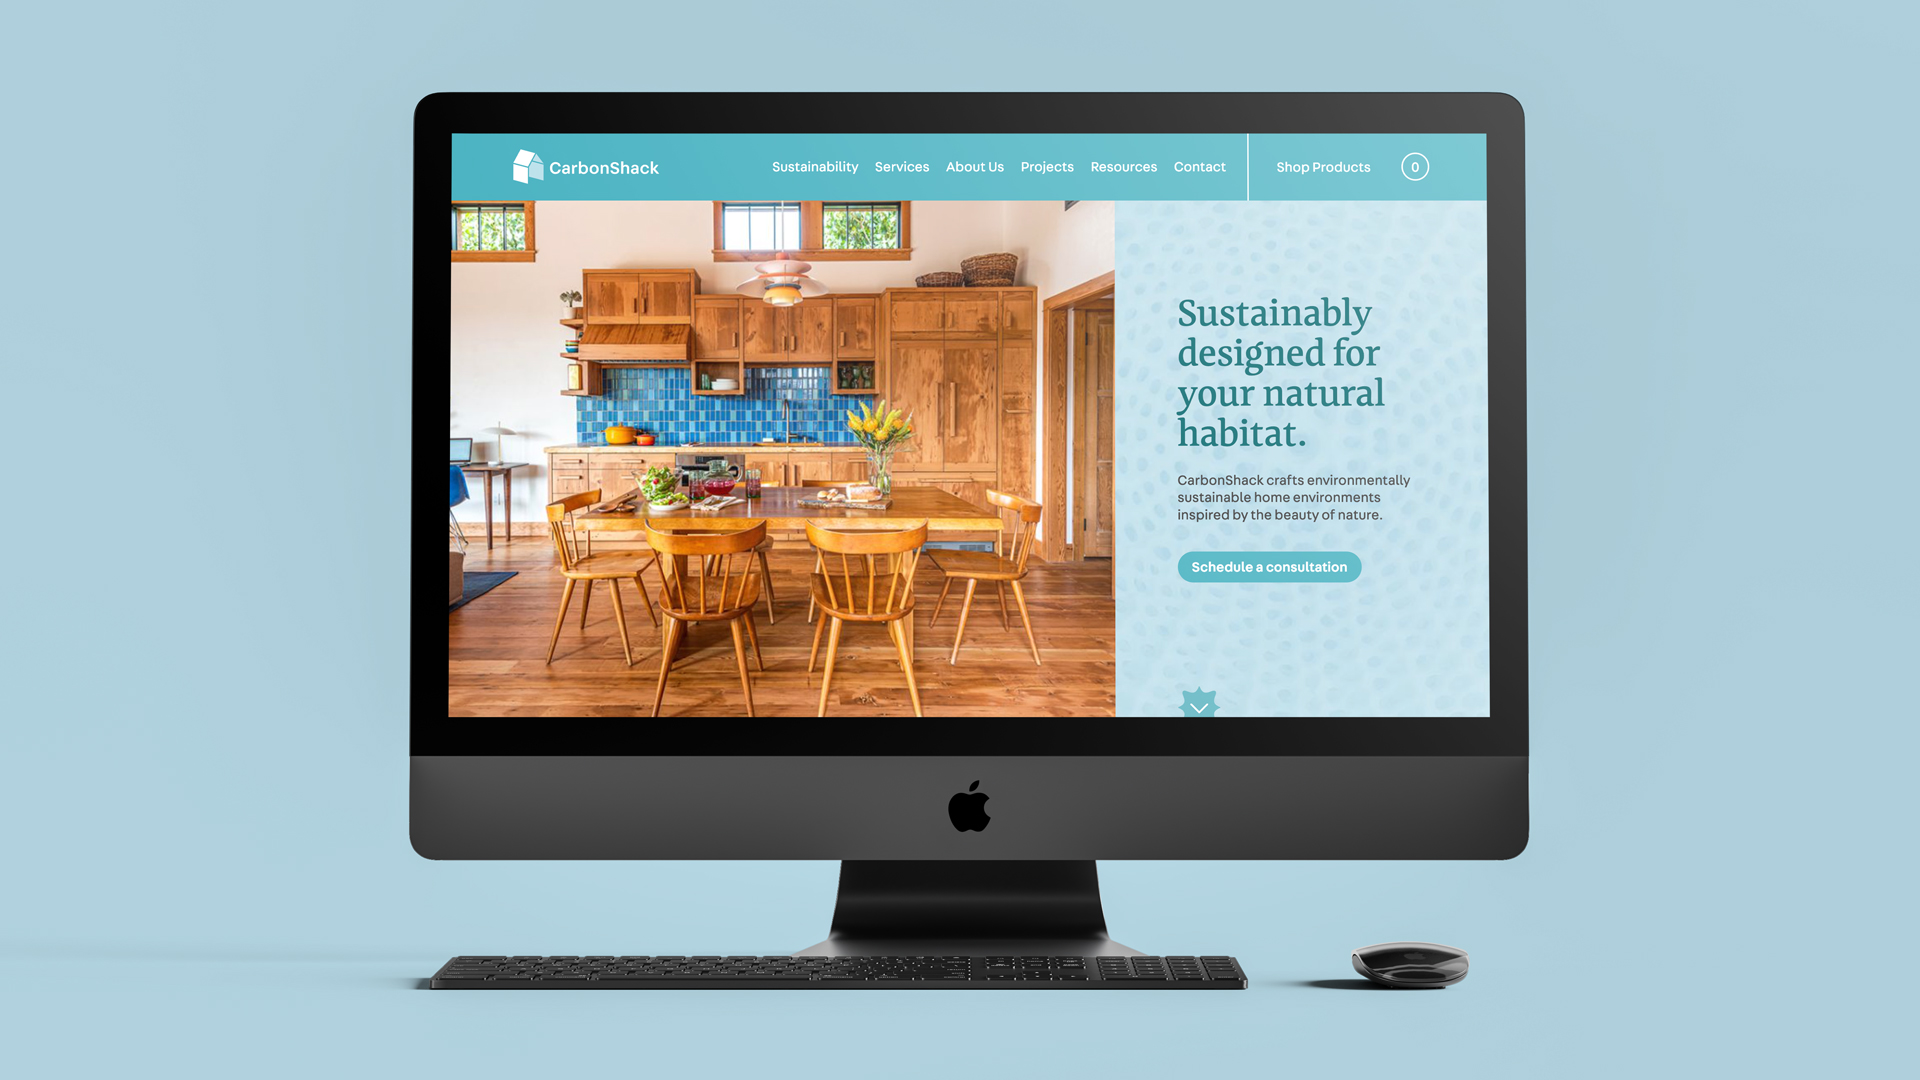 CarbonShack brand, marketing campaign, and website designed by Kilter